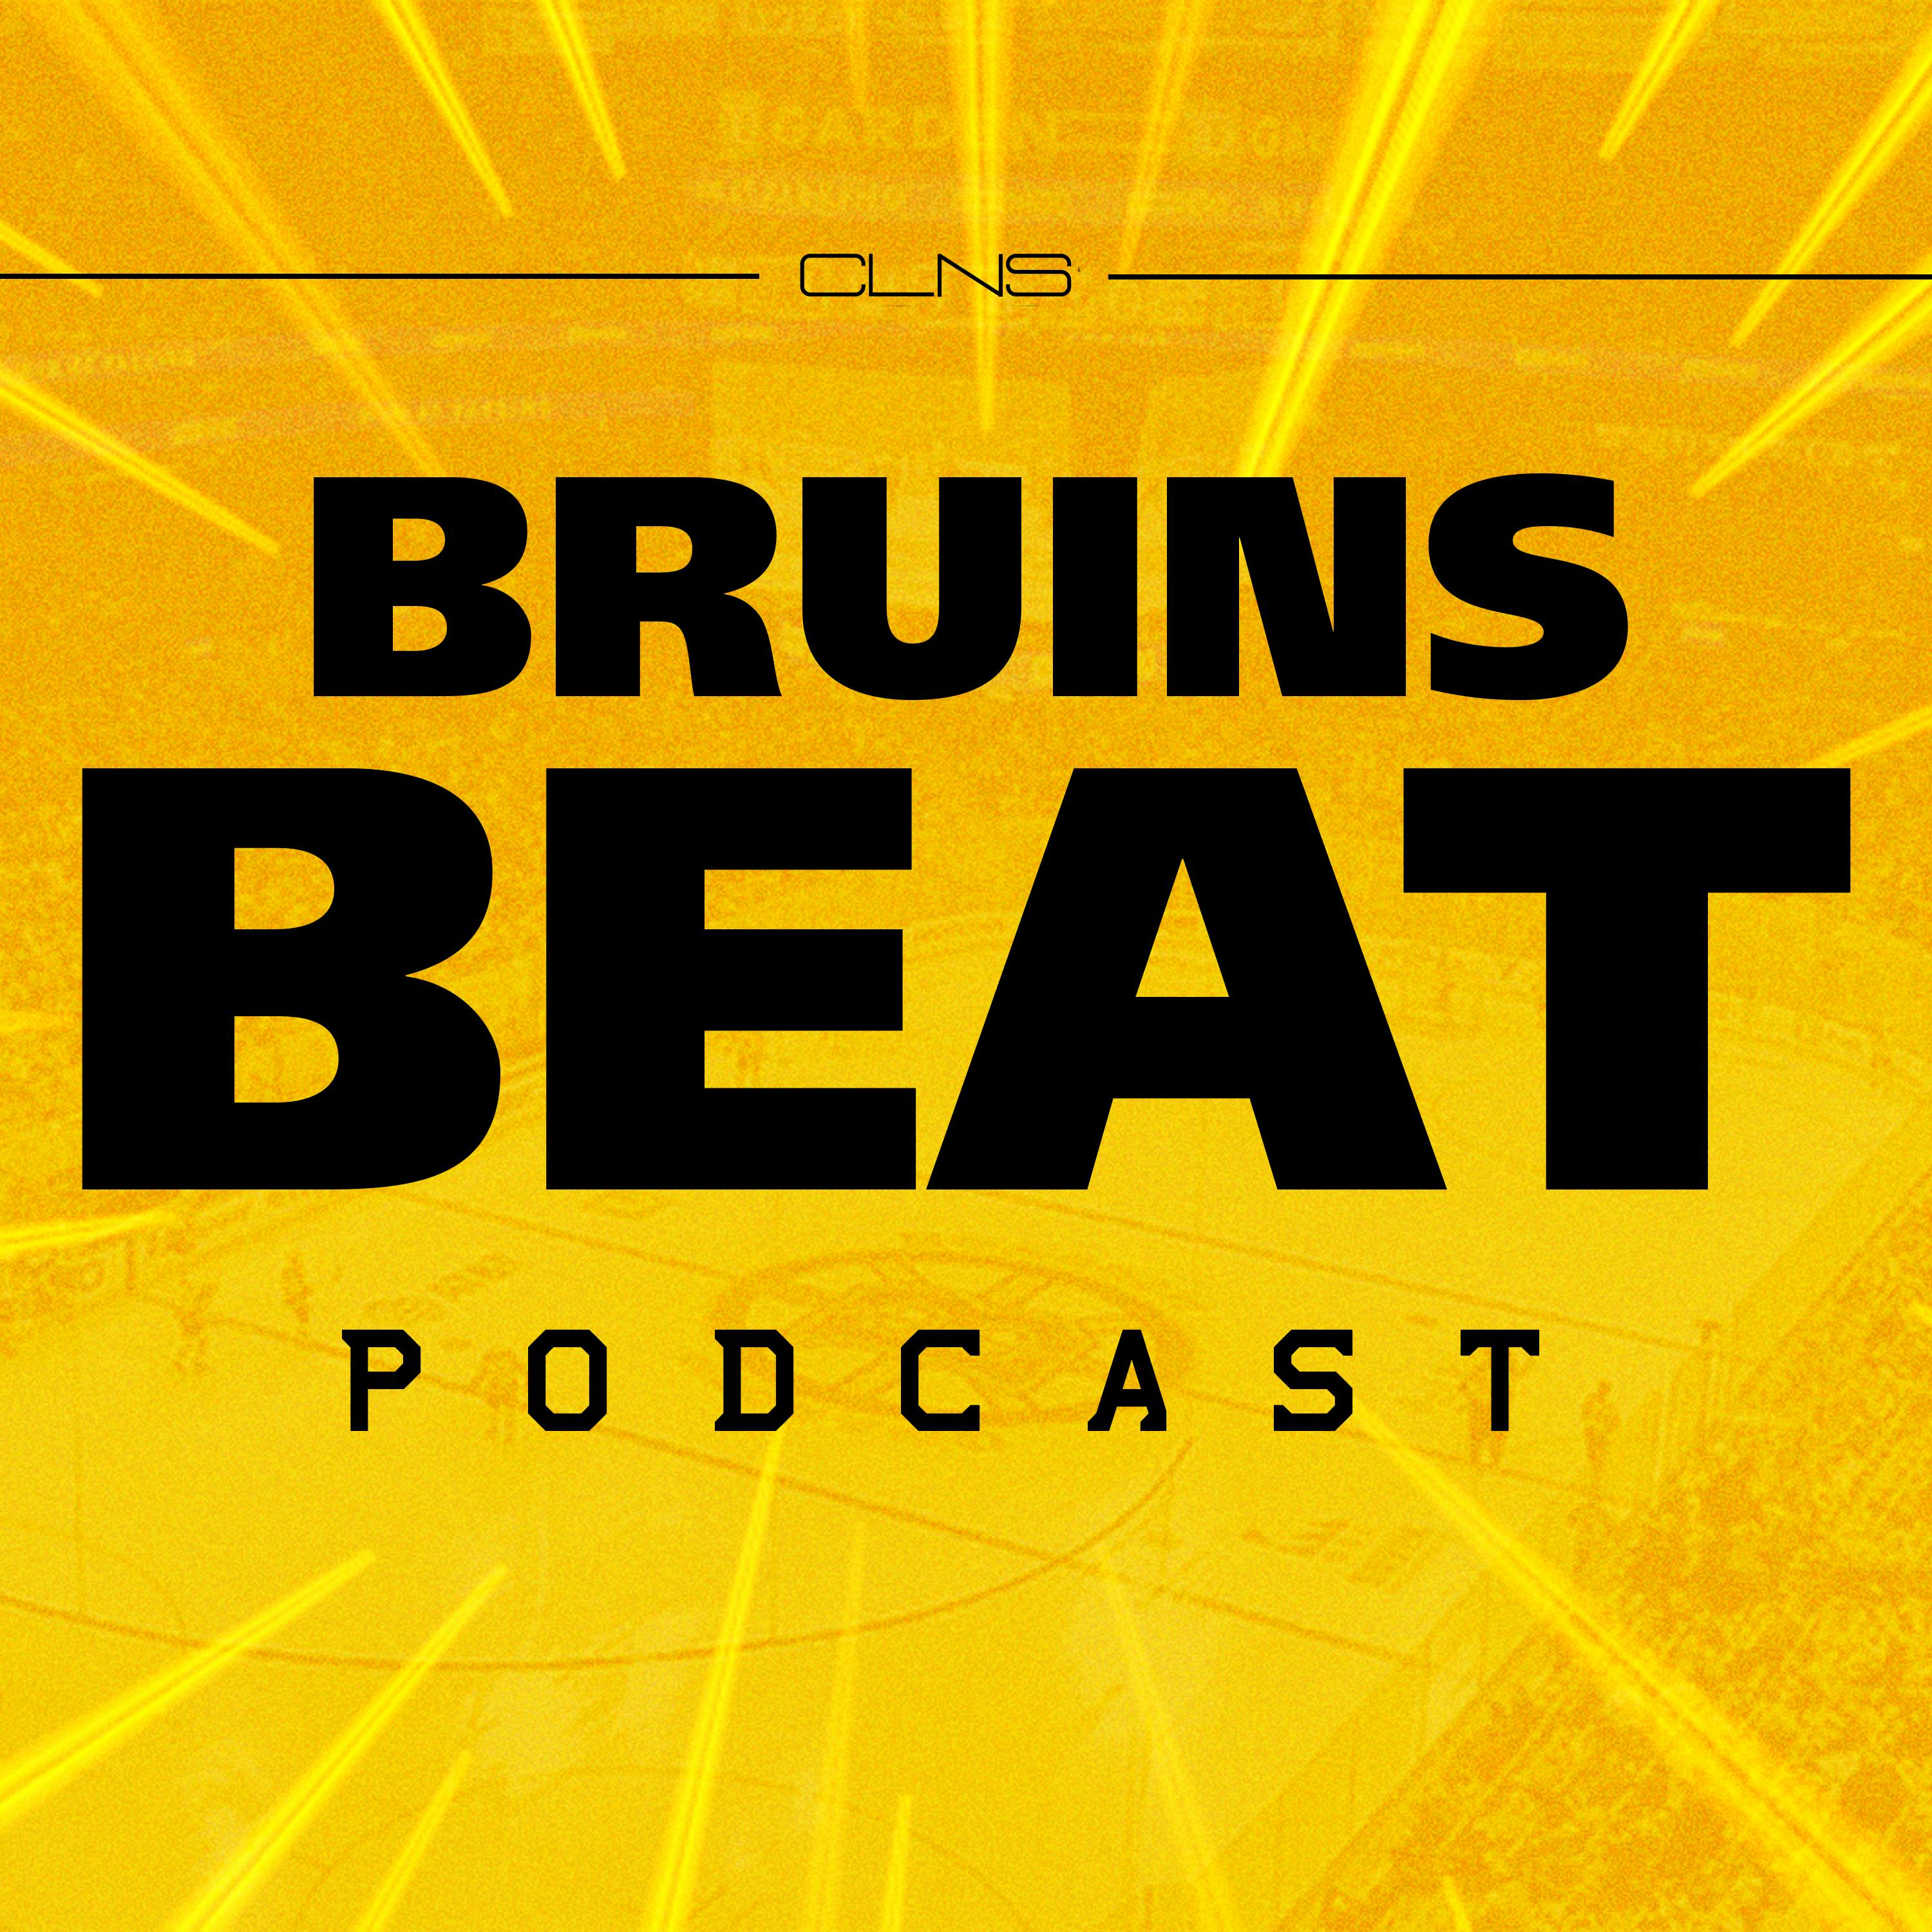 Who has been the Bruins Team MVP so far & What is the biggest concern? | Marina Maher | Bruins Beat w/ Evan Marinofsky